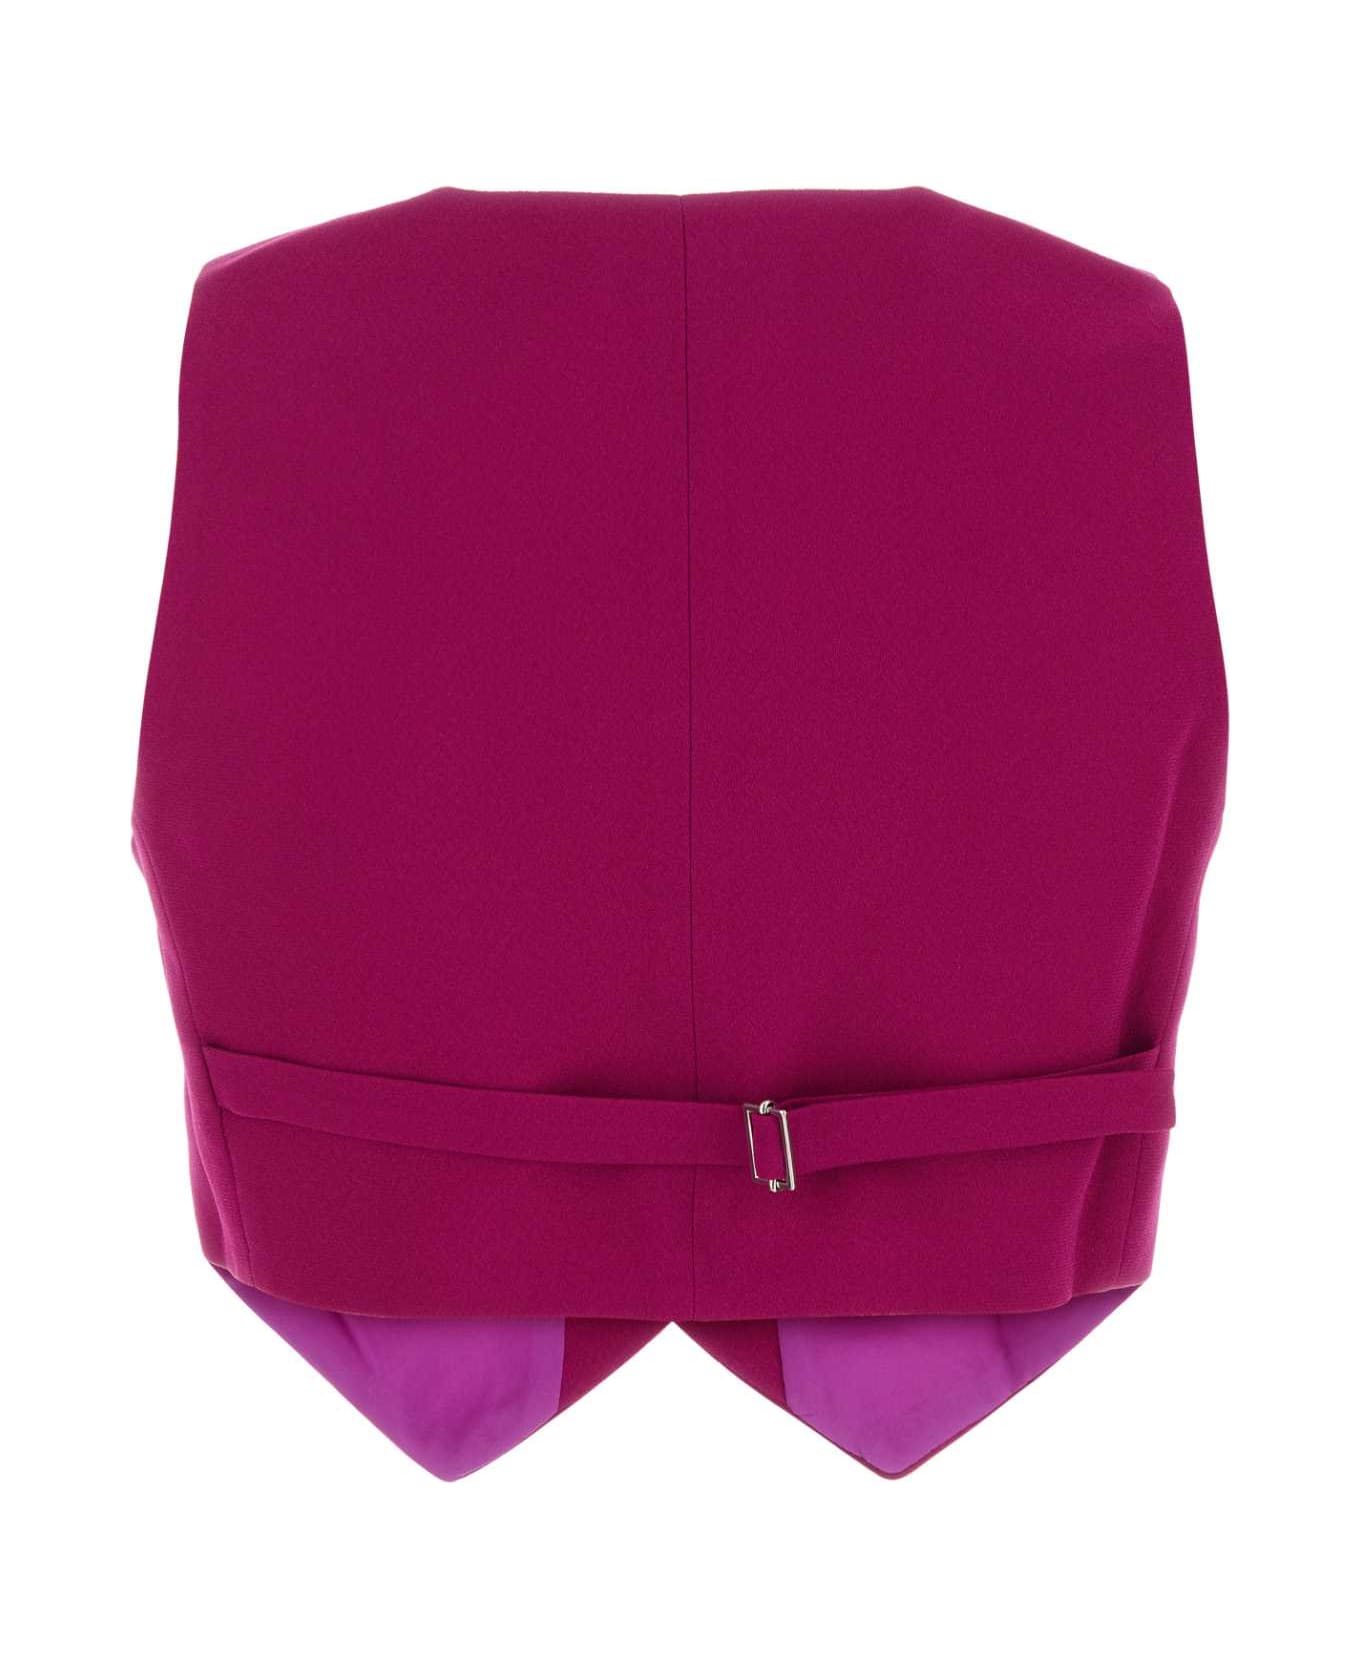 The Andamane Tyrian Purple Polyester Vest - CICLAMINO